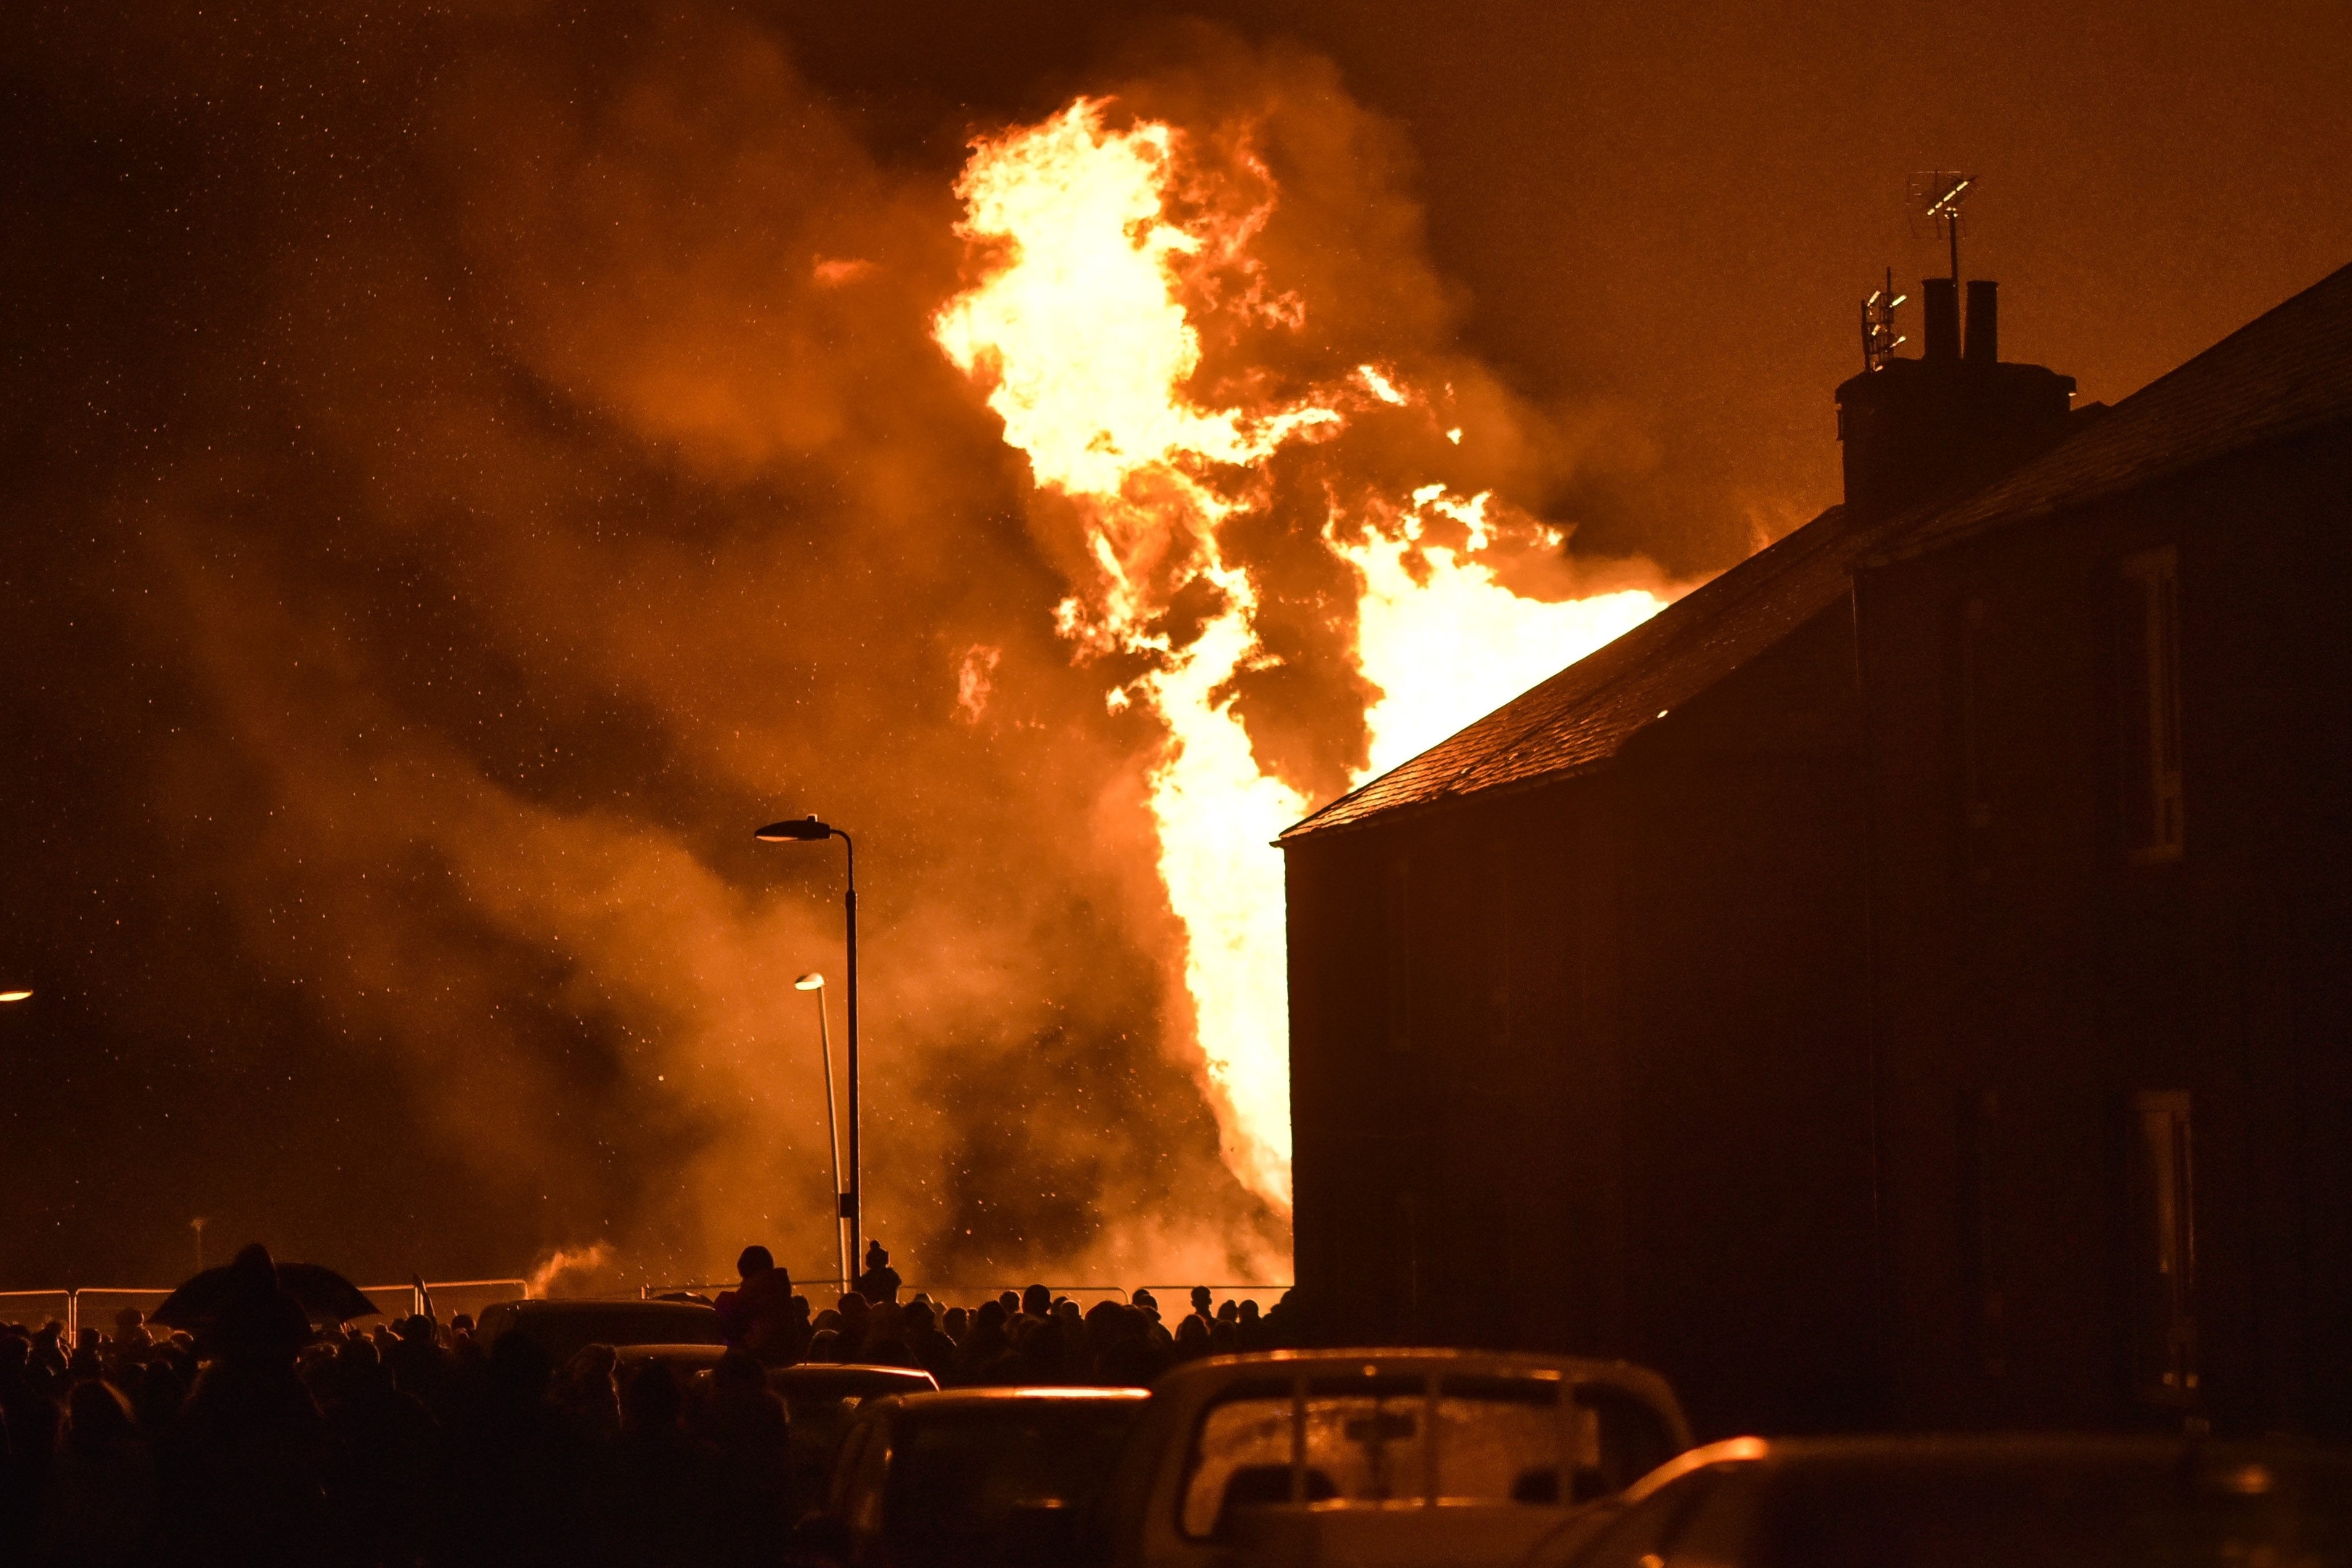 Members of the public gather to watch the bonfire in Peterhead, Aberdeenshire on November 05 2015. Events are being held across the country tonight, Thurs November 05, to mark Guy Fawkes Day. The bonfire in Peterhead, Aberdeenshire, which is created by pallets and other large wooden objects, is thought to be one of the biggest in Scotland. It's estimated to stand at over 20 feet tall.